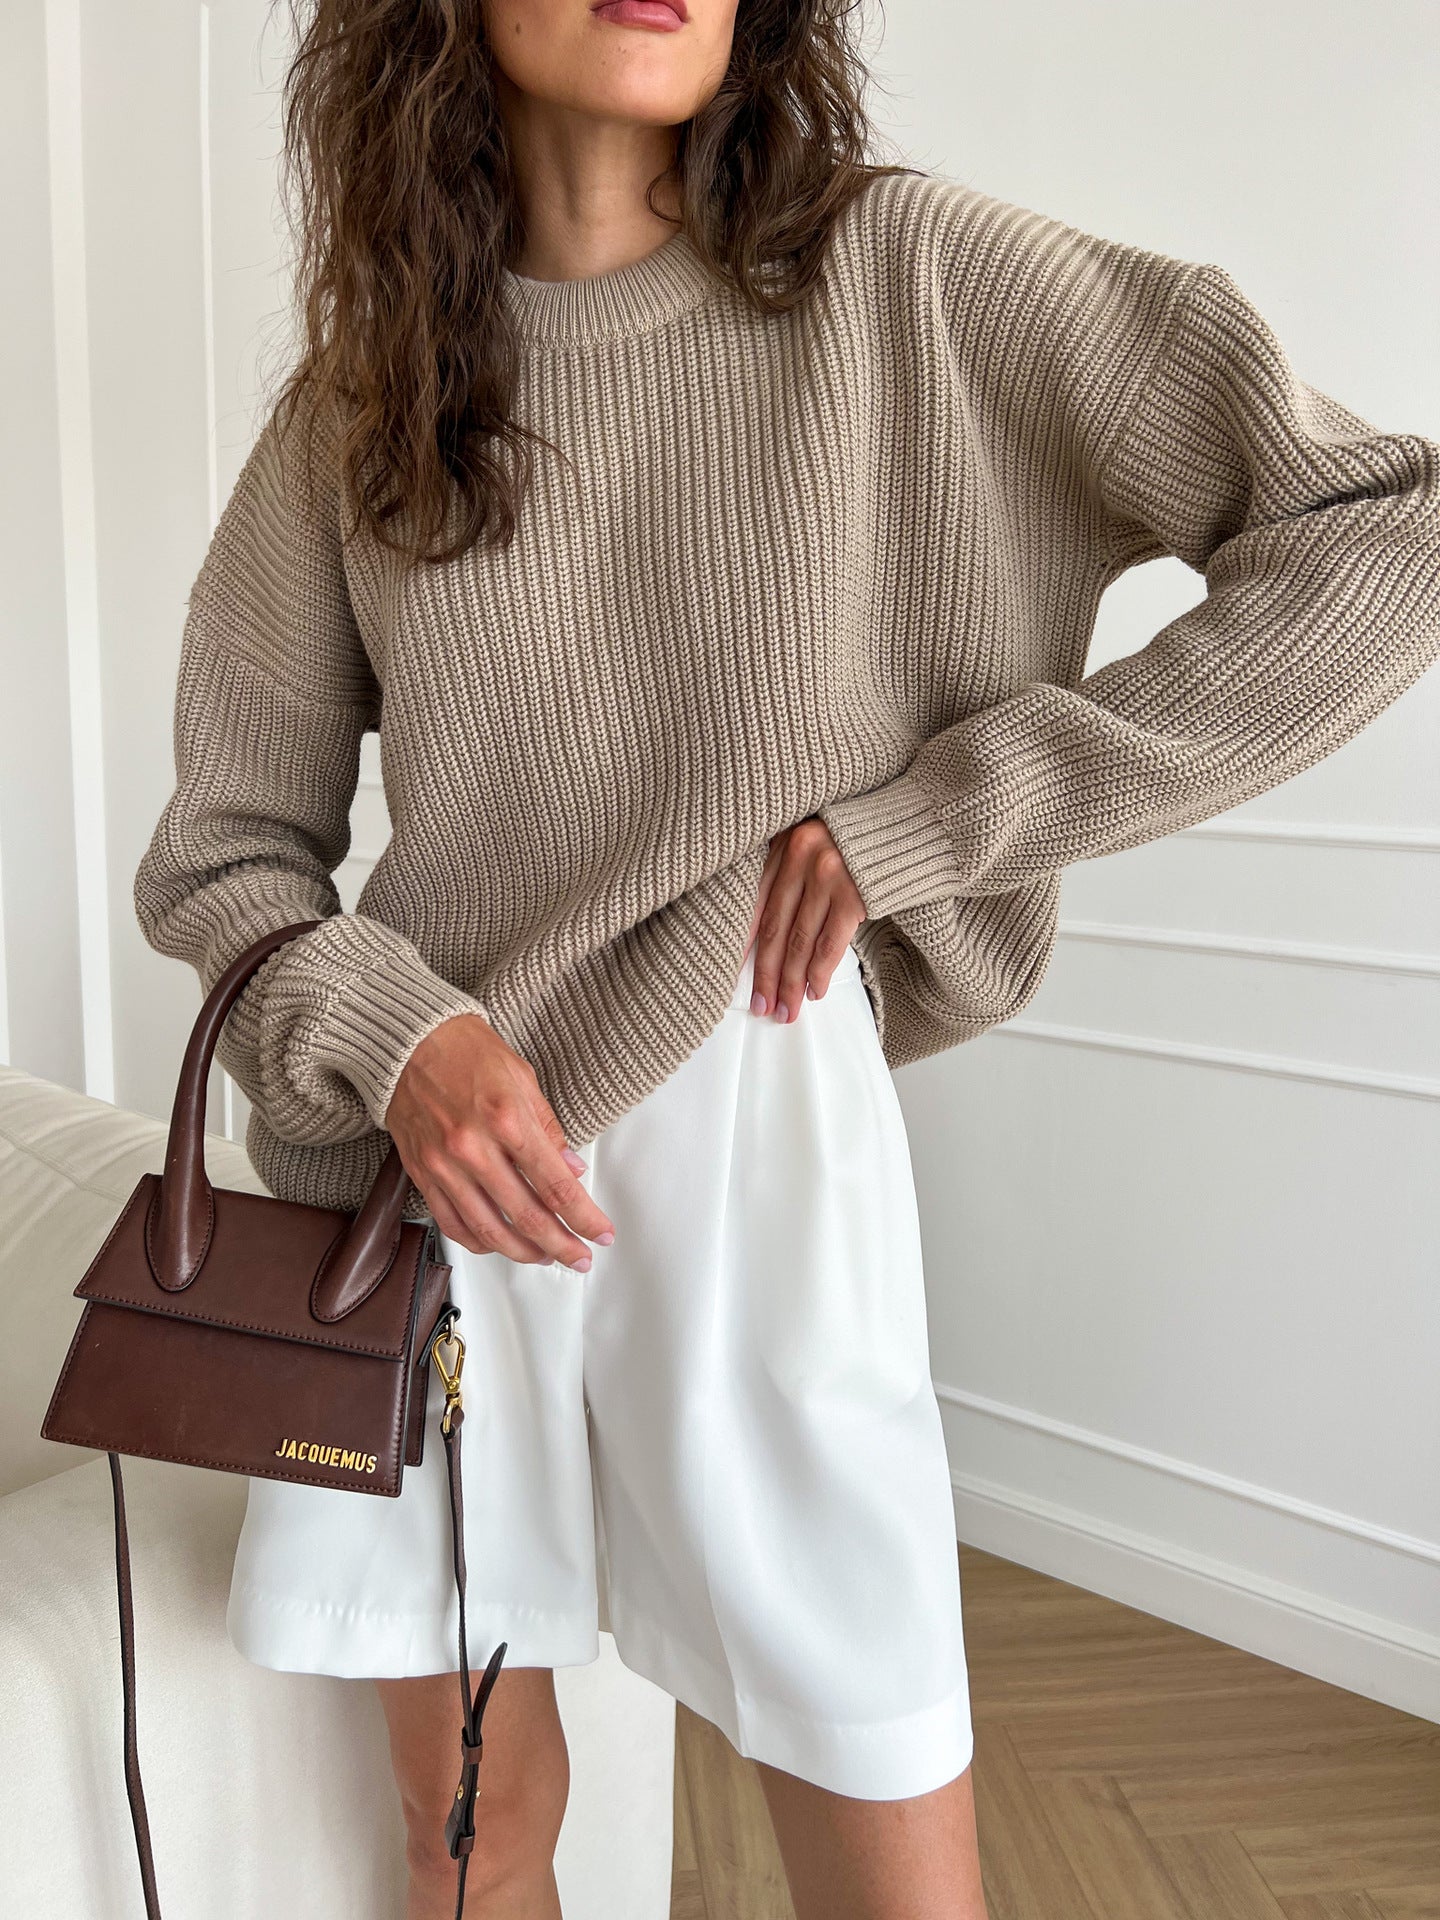 Women's Knitwear Round Sleeve Neck Loose Solid Color Sweater